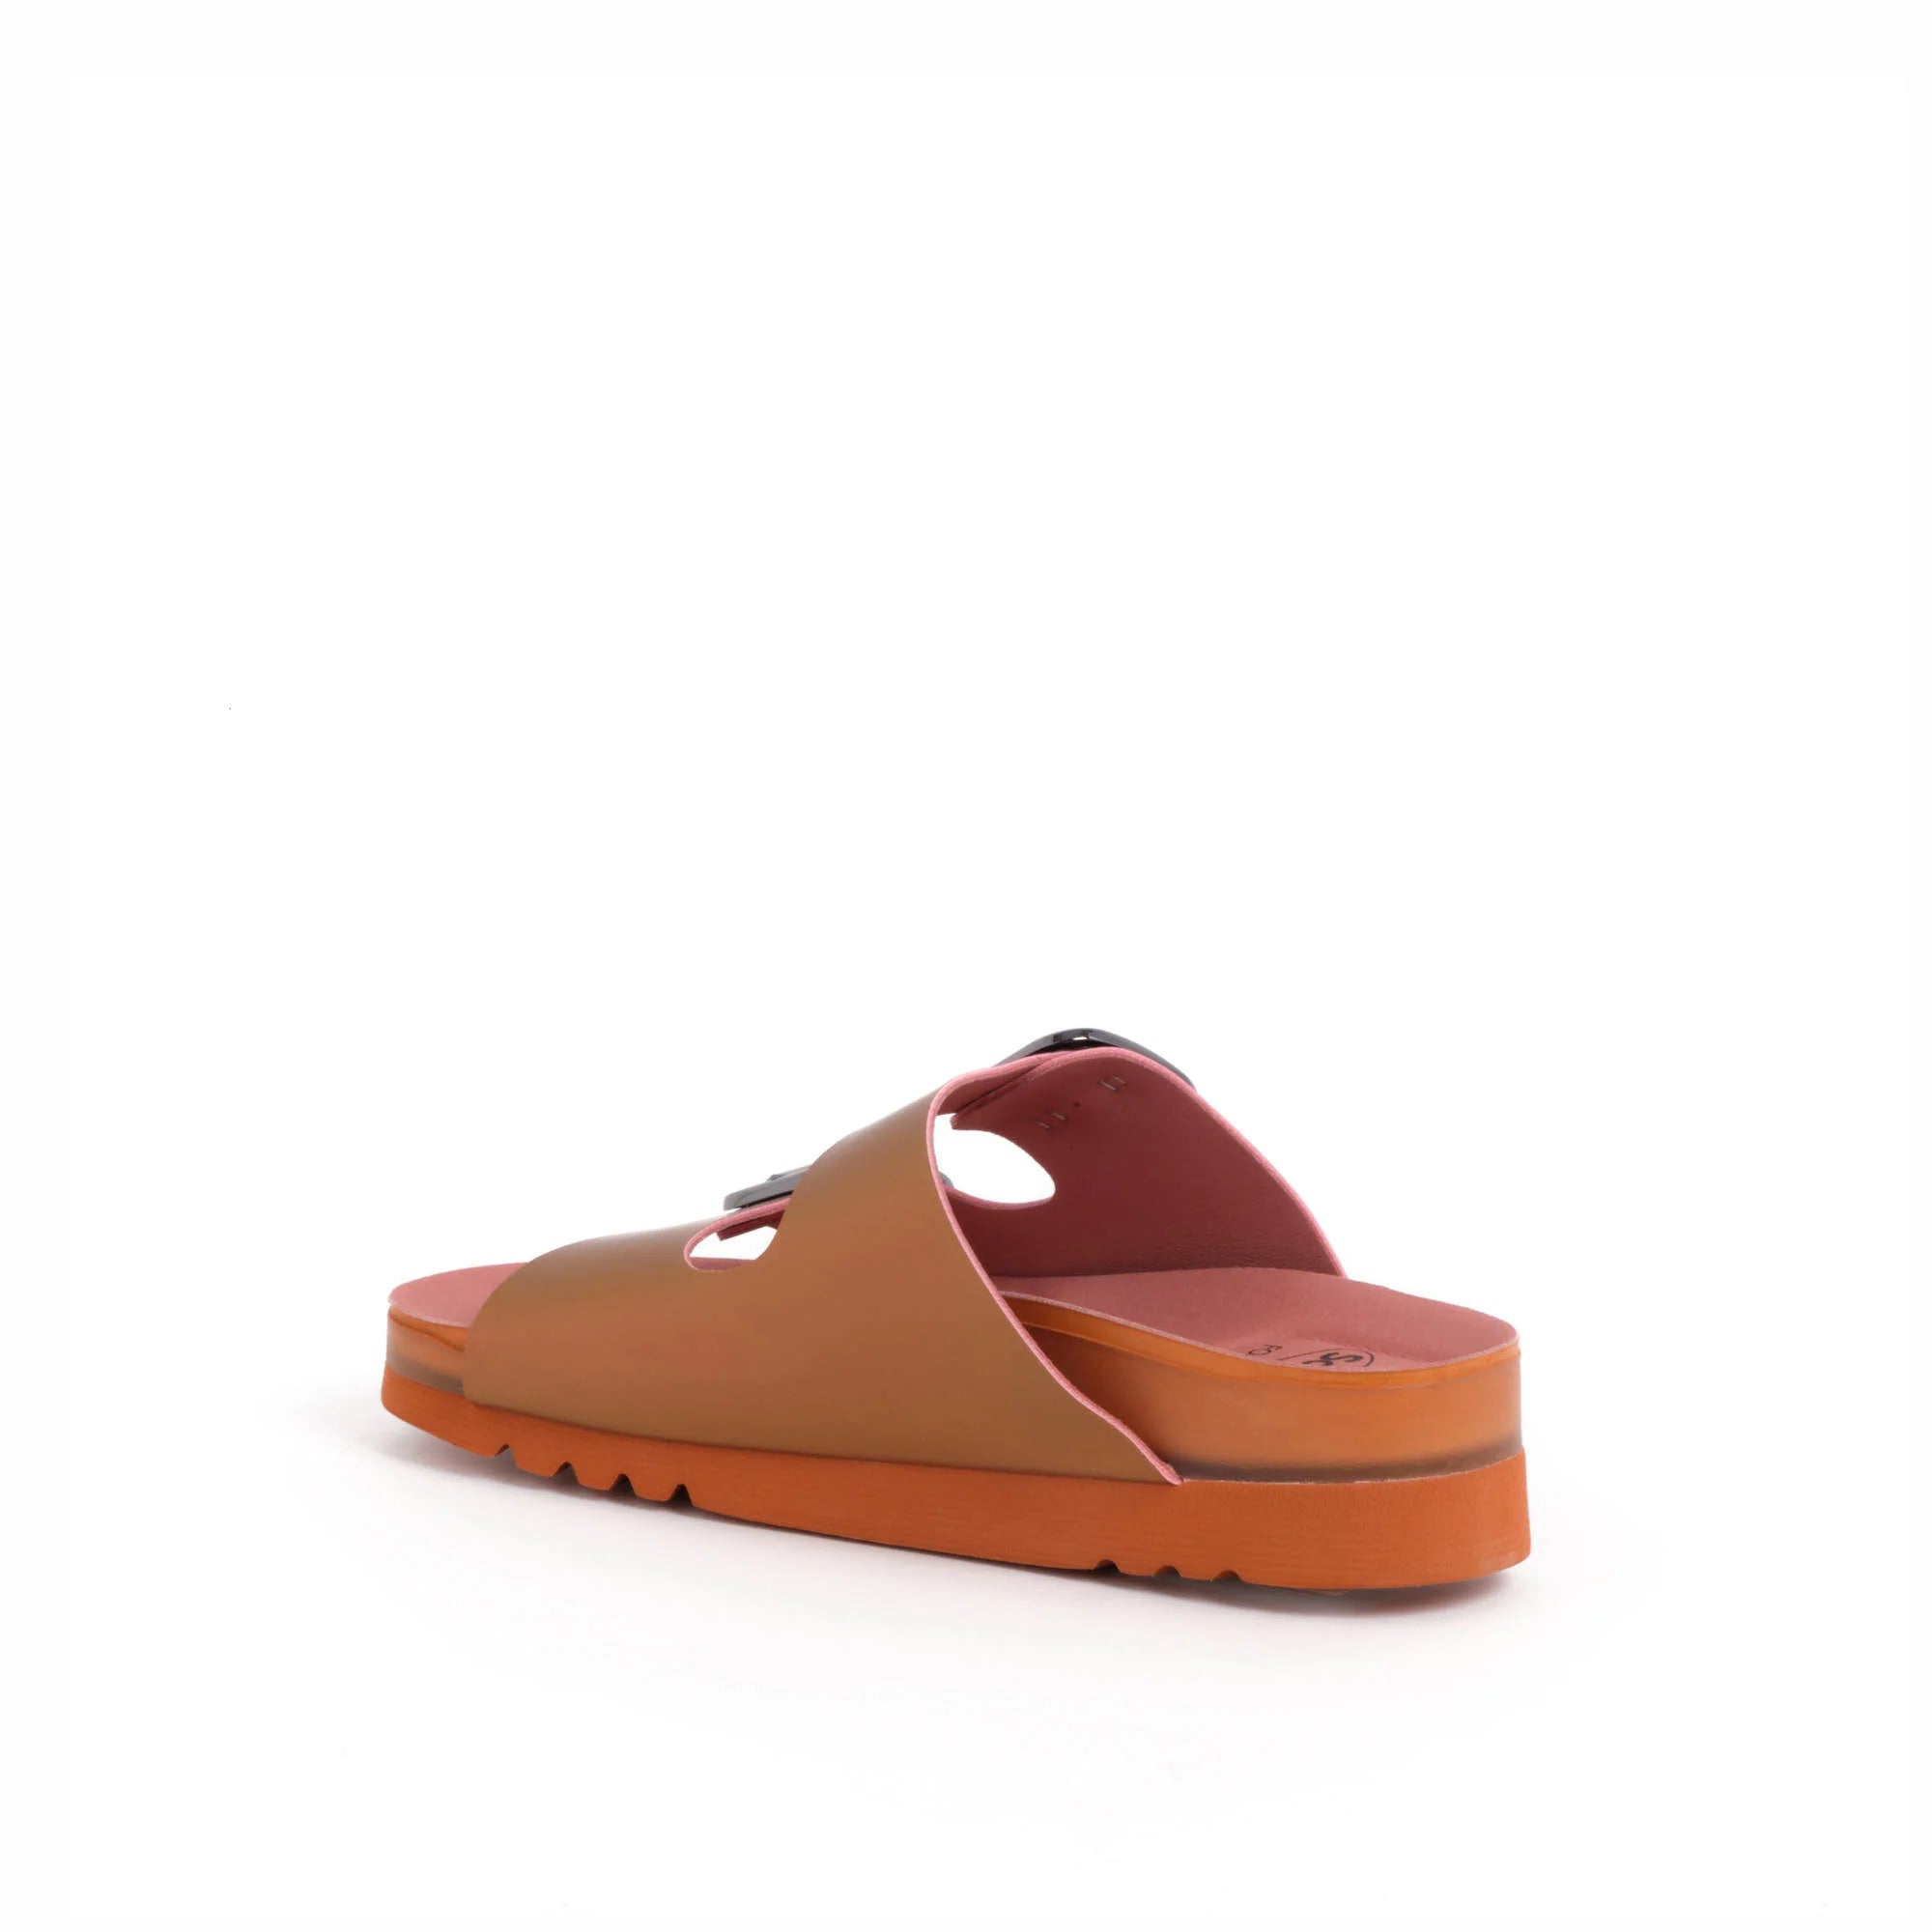 Vally Mules Synthetic Iridescent Orange N. 40 - Vally Mules Synthetic Iridescent Orange N. 40